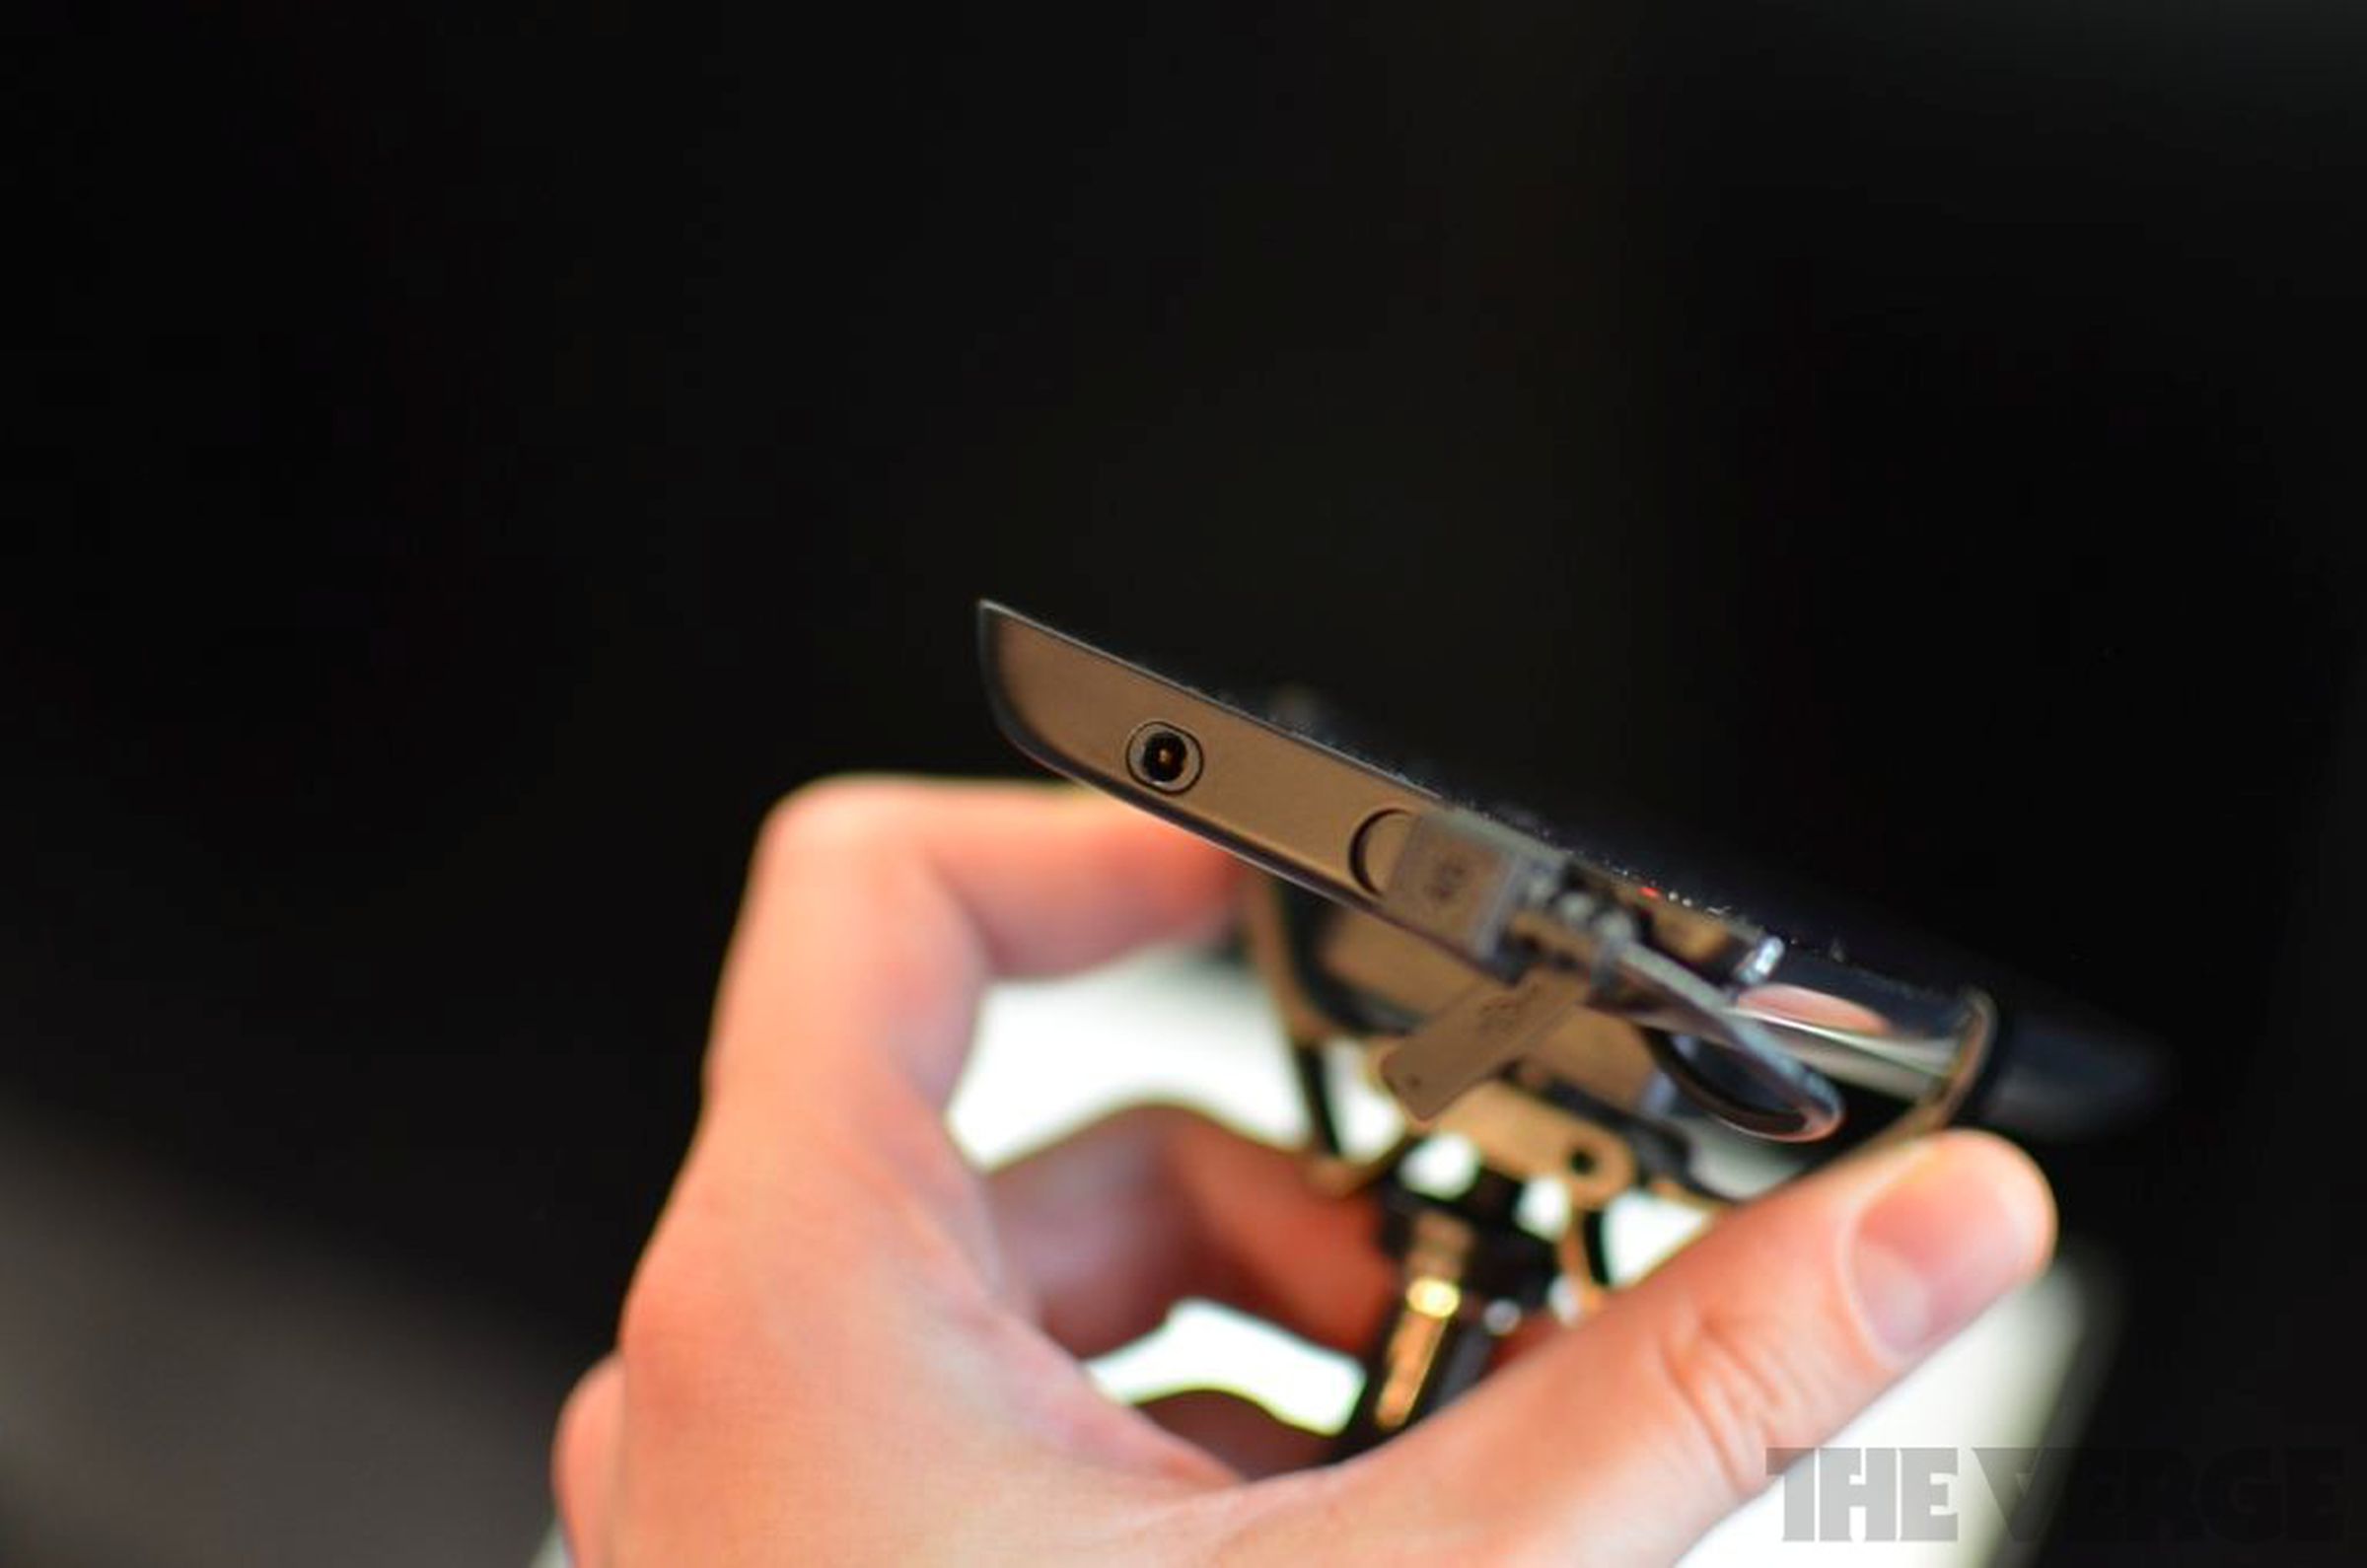 Eluga 5-inch prototype and Eluga hands-on pictures